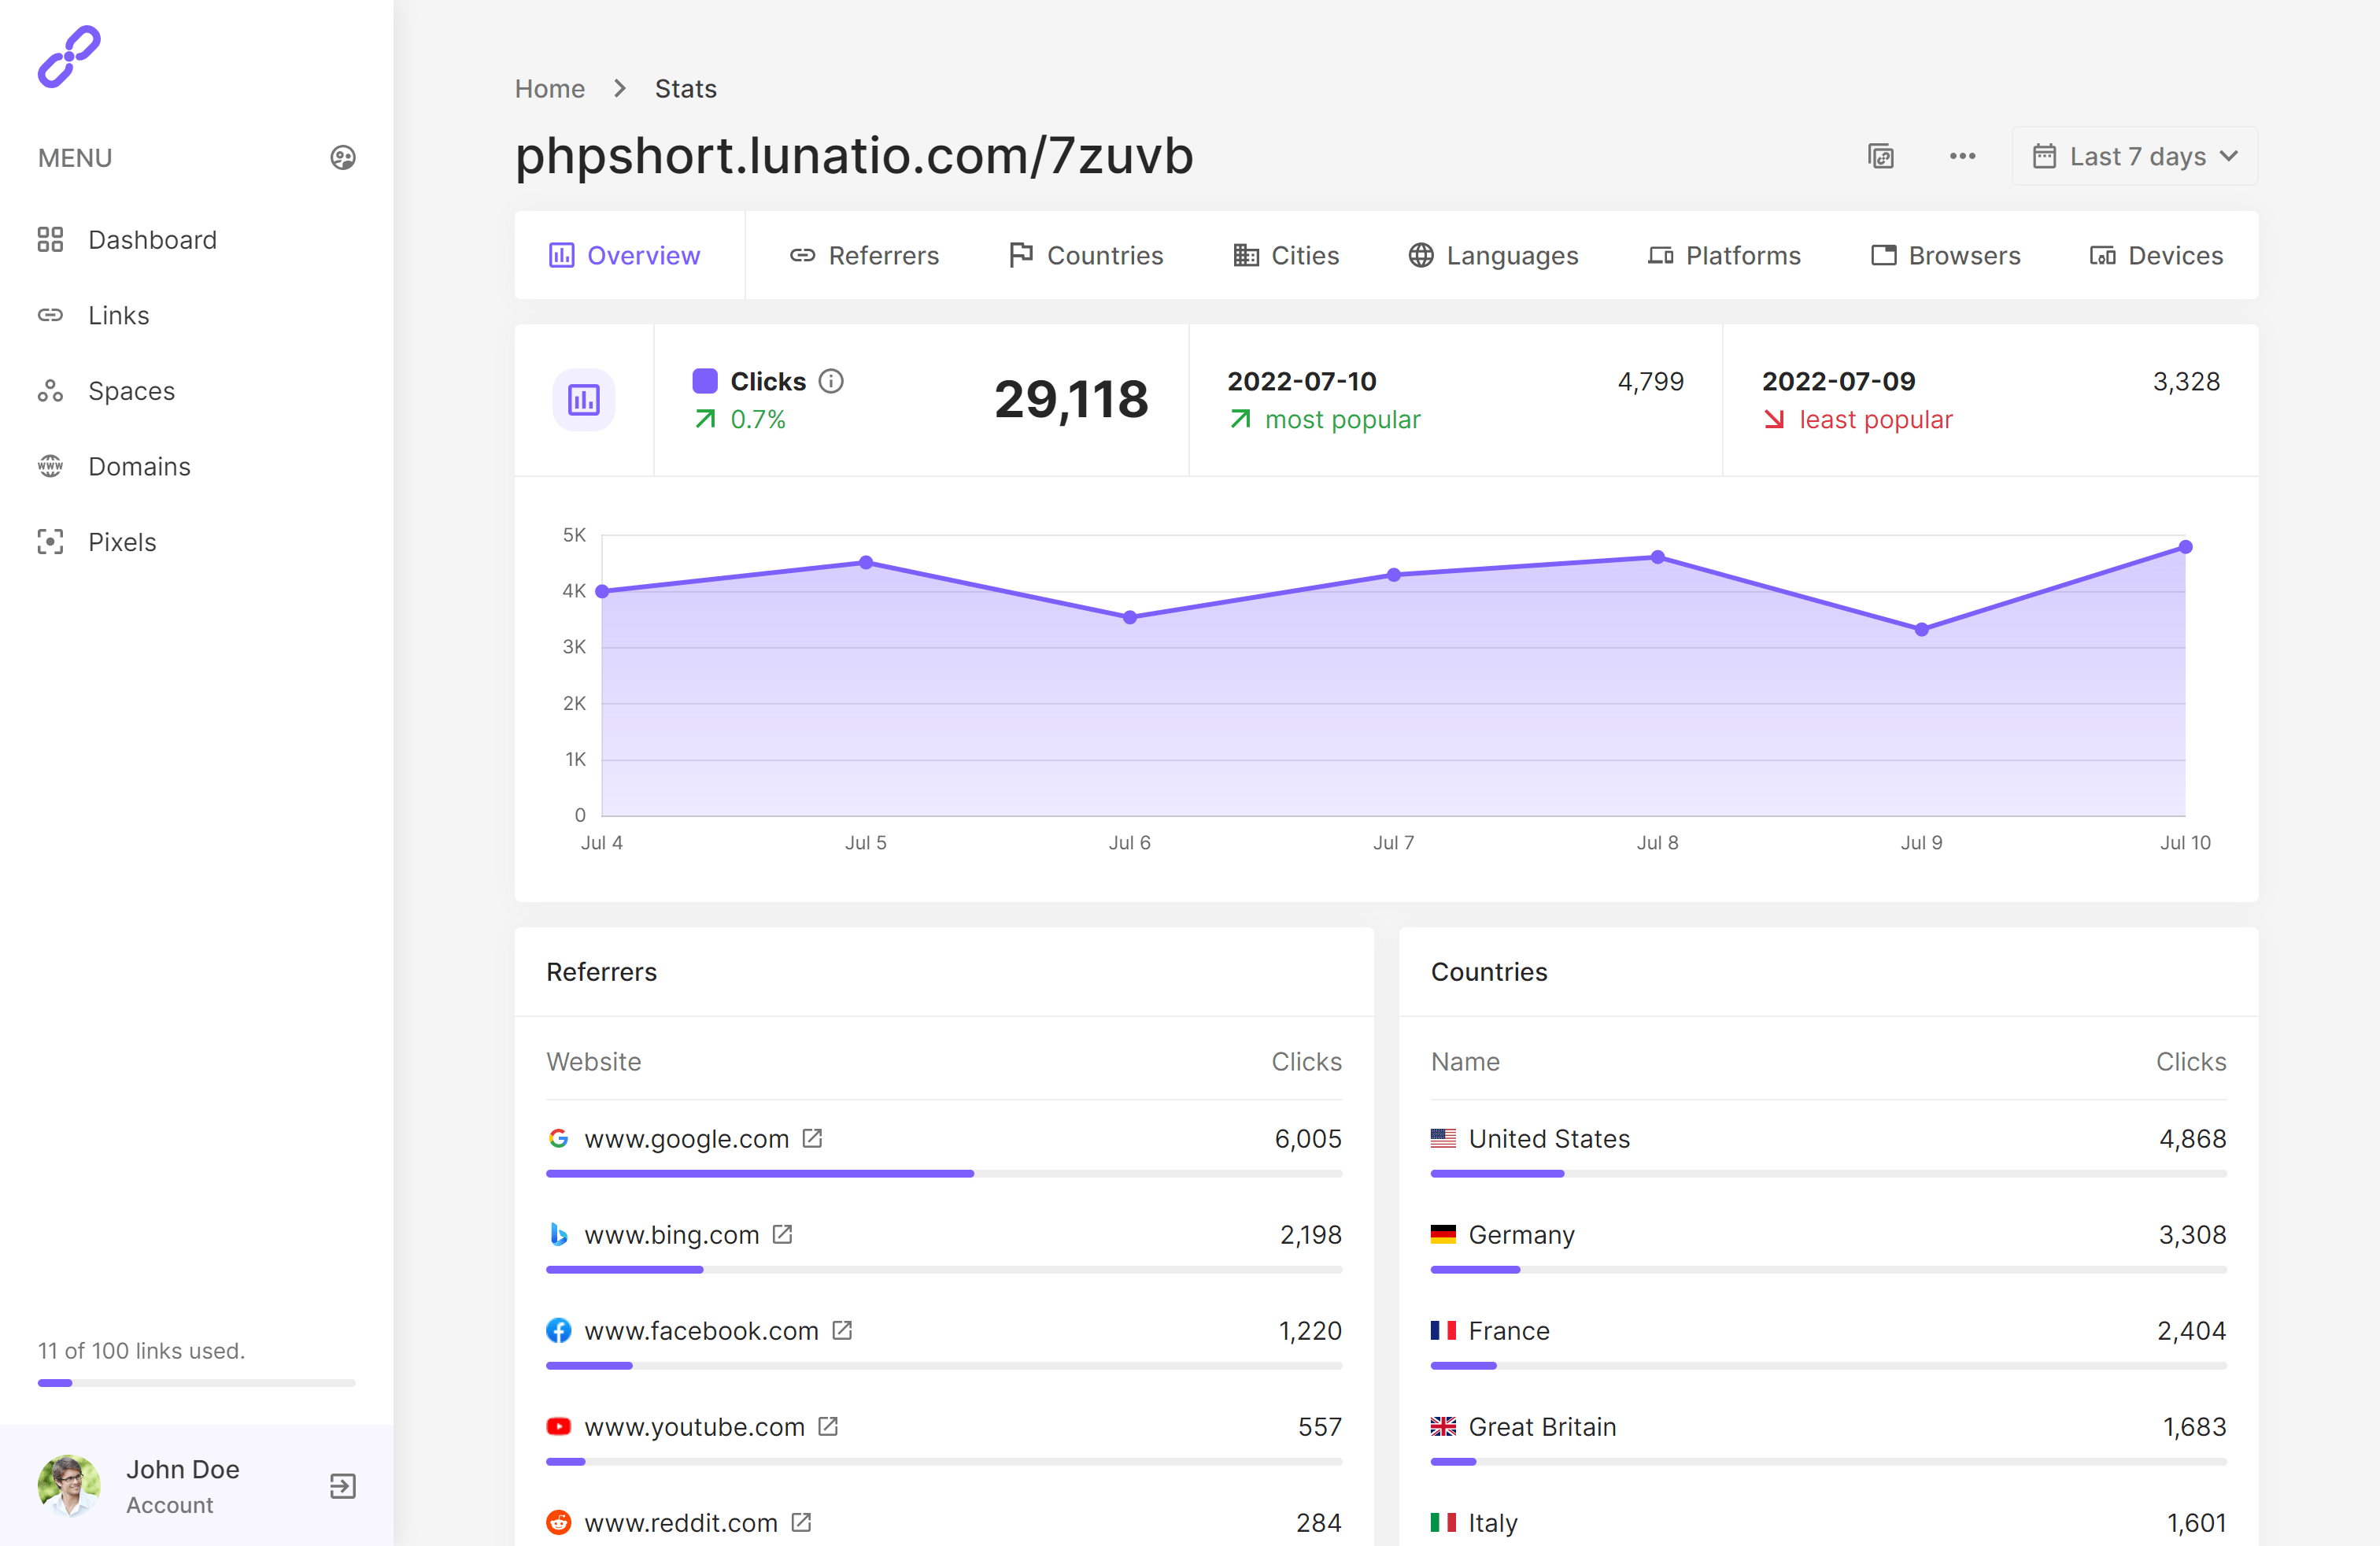 phpShort stats overview